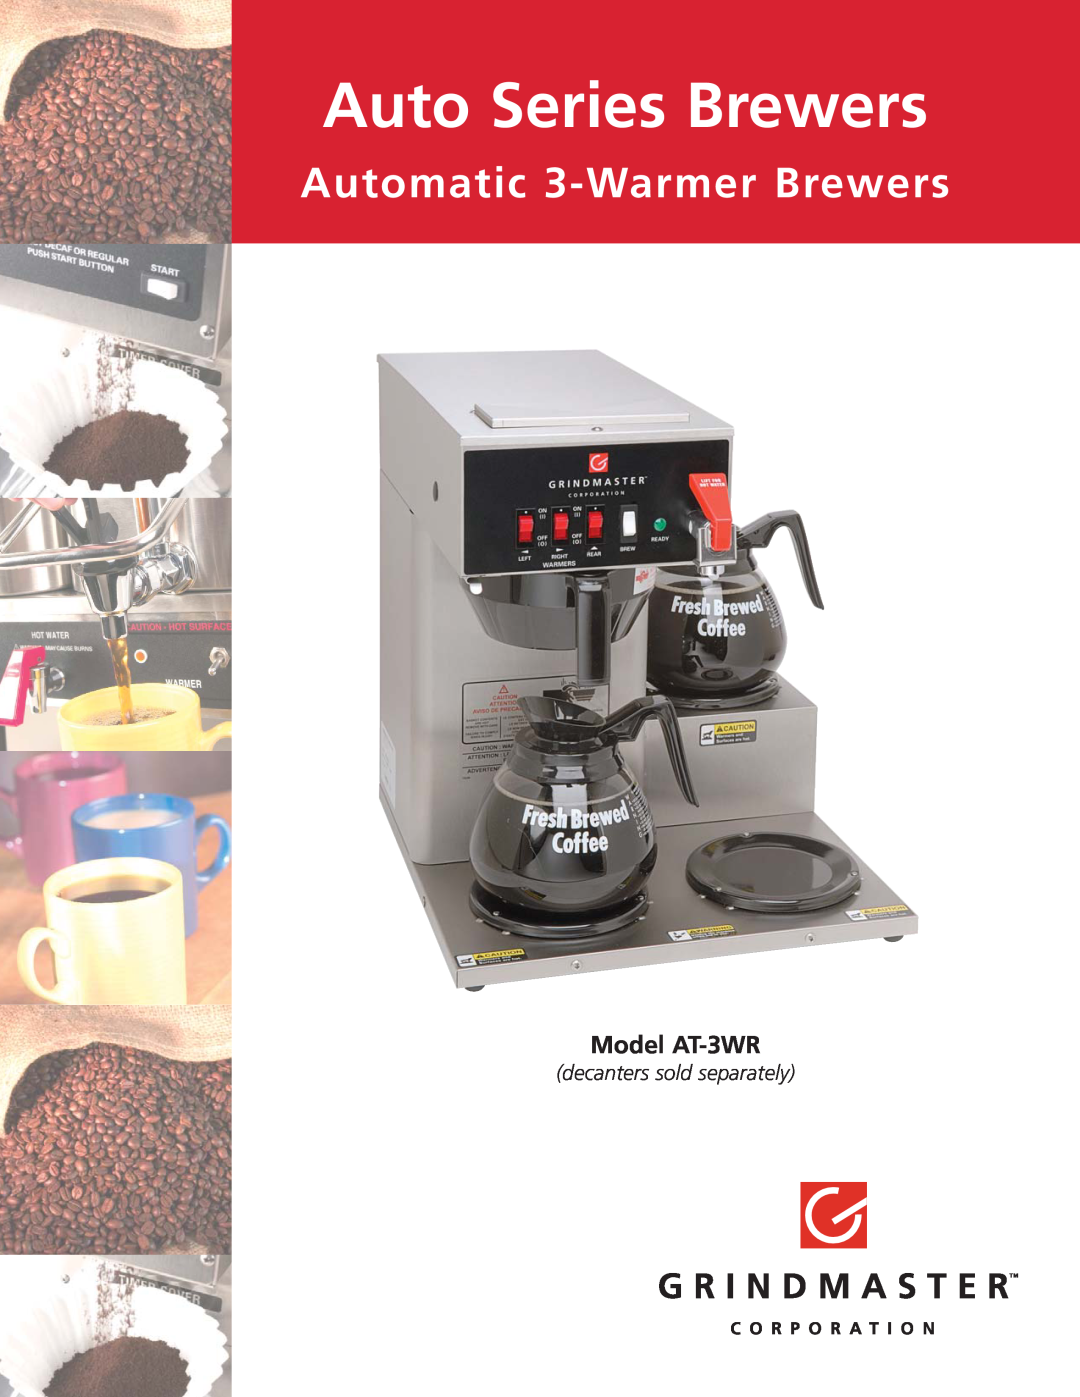 Grindmaster manual Auto Series Brewers, Automatic 3-WarmerBrewers, Model AT-3WR, decanters sold separately 